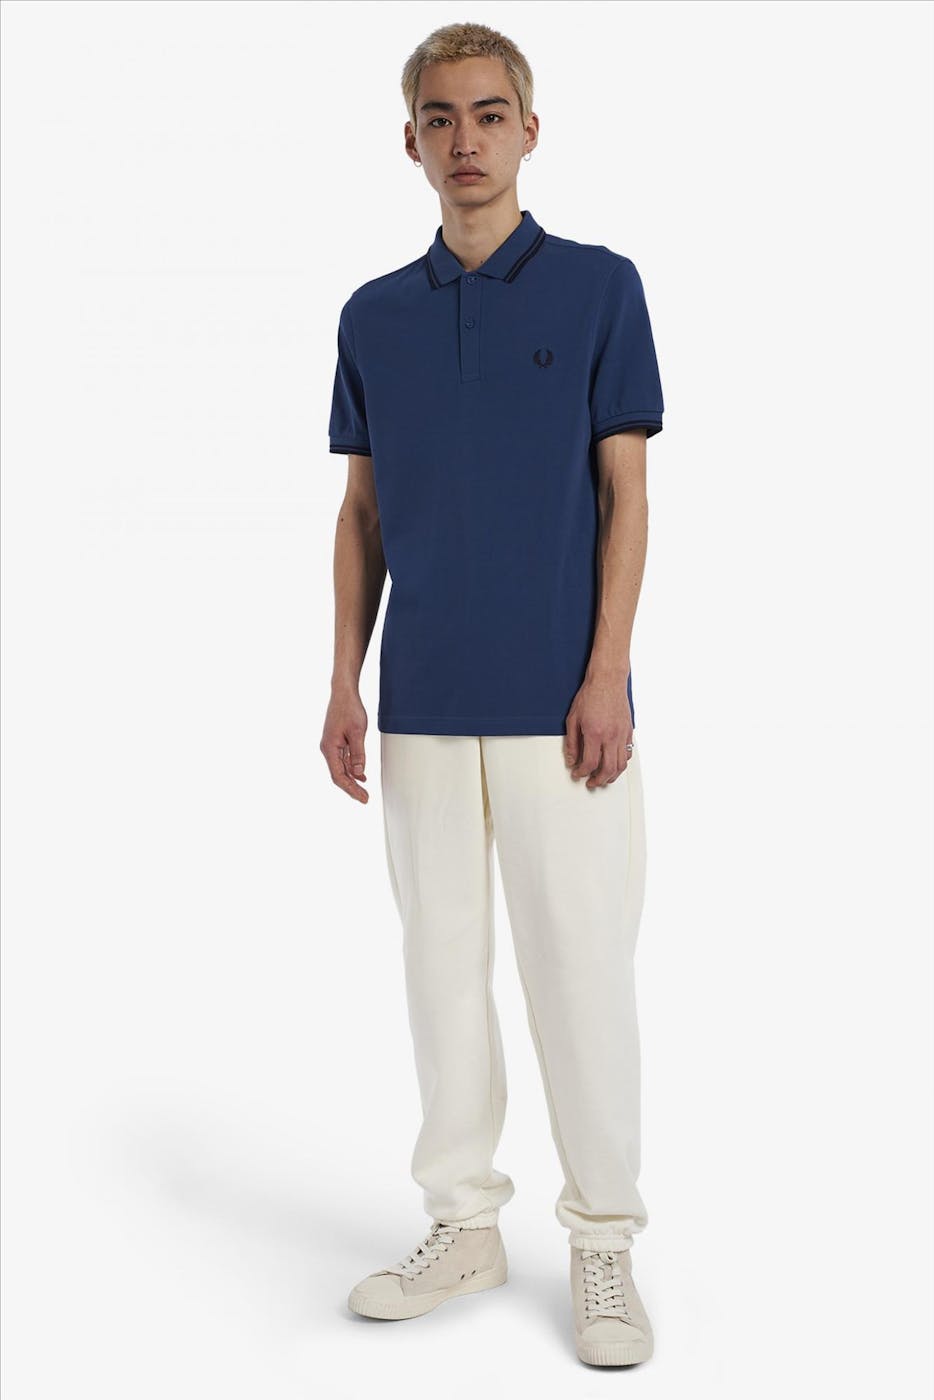 Fred Perry - Blauwe-donkerblauwe Twin Tipped polo